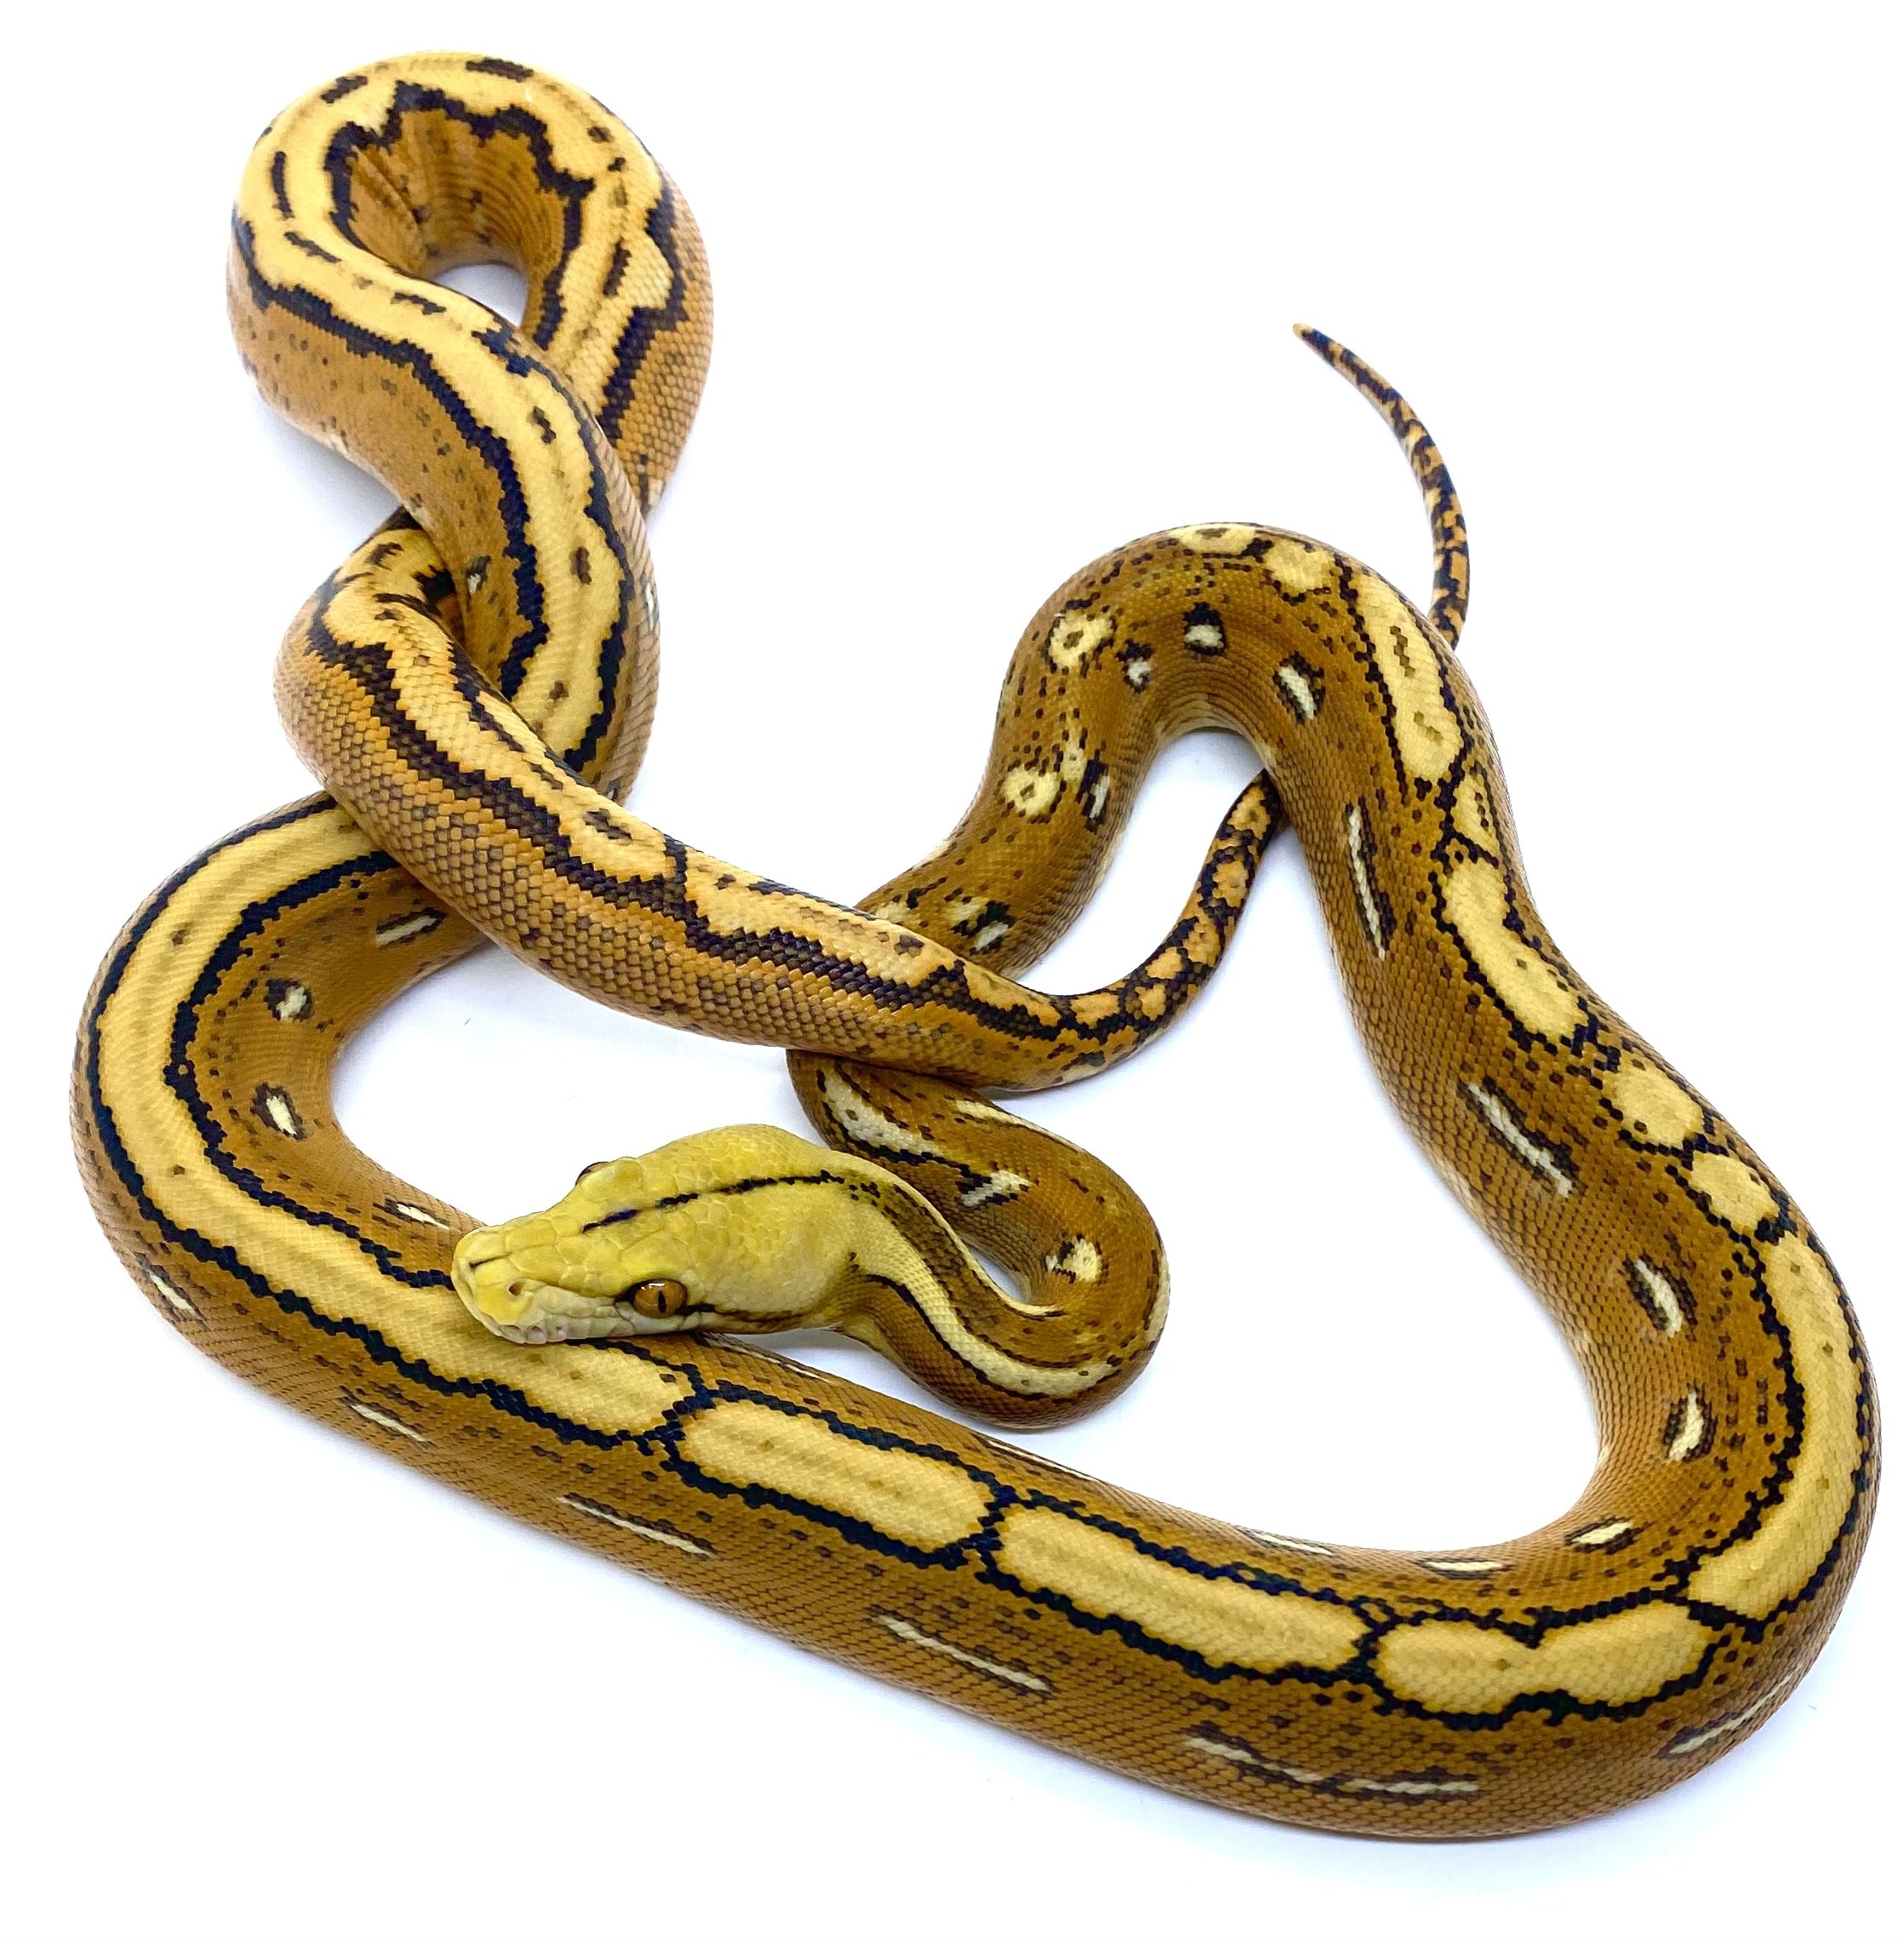 Orange Ghost Stripe Reticulated Python by Prehistoric Pets